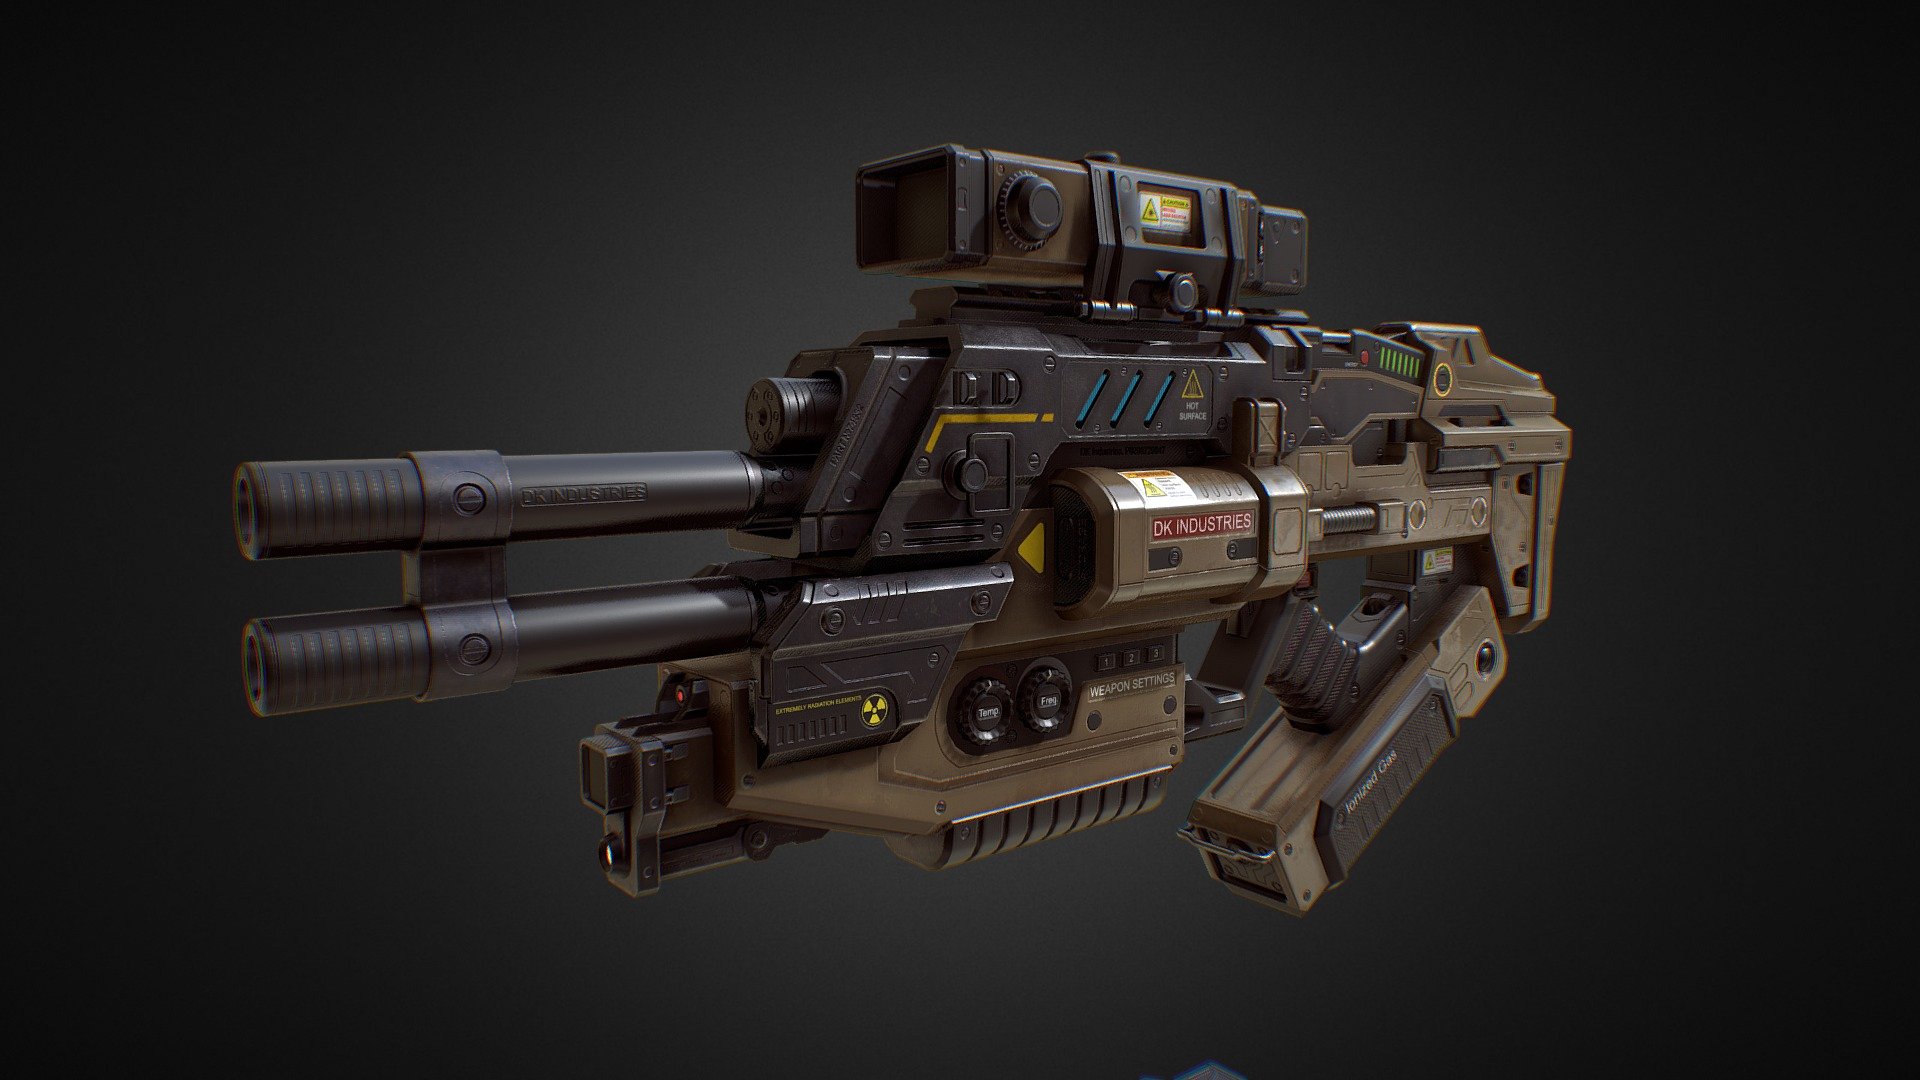 PBR Modular Plasma Gun from Sci-Fi weapon pack on unity assetstore (PBR SciFi Weapons v1) with movable parts and hires textures - PBR Assault Plasma Gun (from Sci-Fi weapon pack) - 3D model by Dmitrii_Kutsenko (@Dmitrii_Kutcenko) 3d model